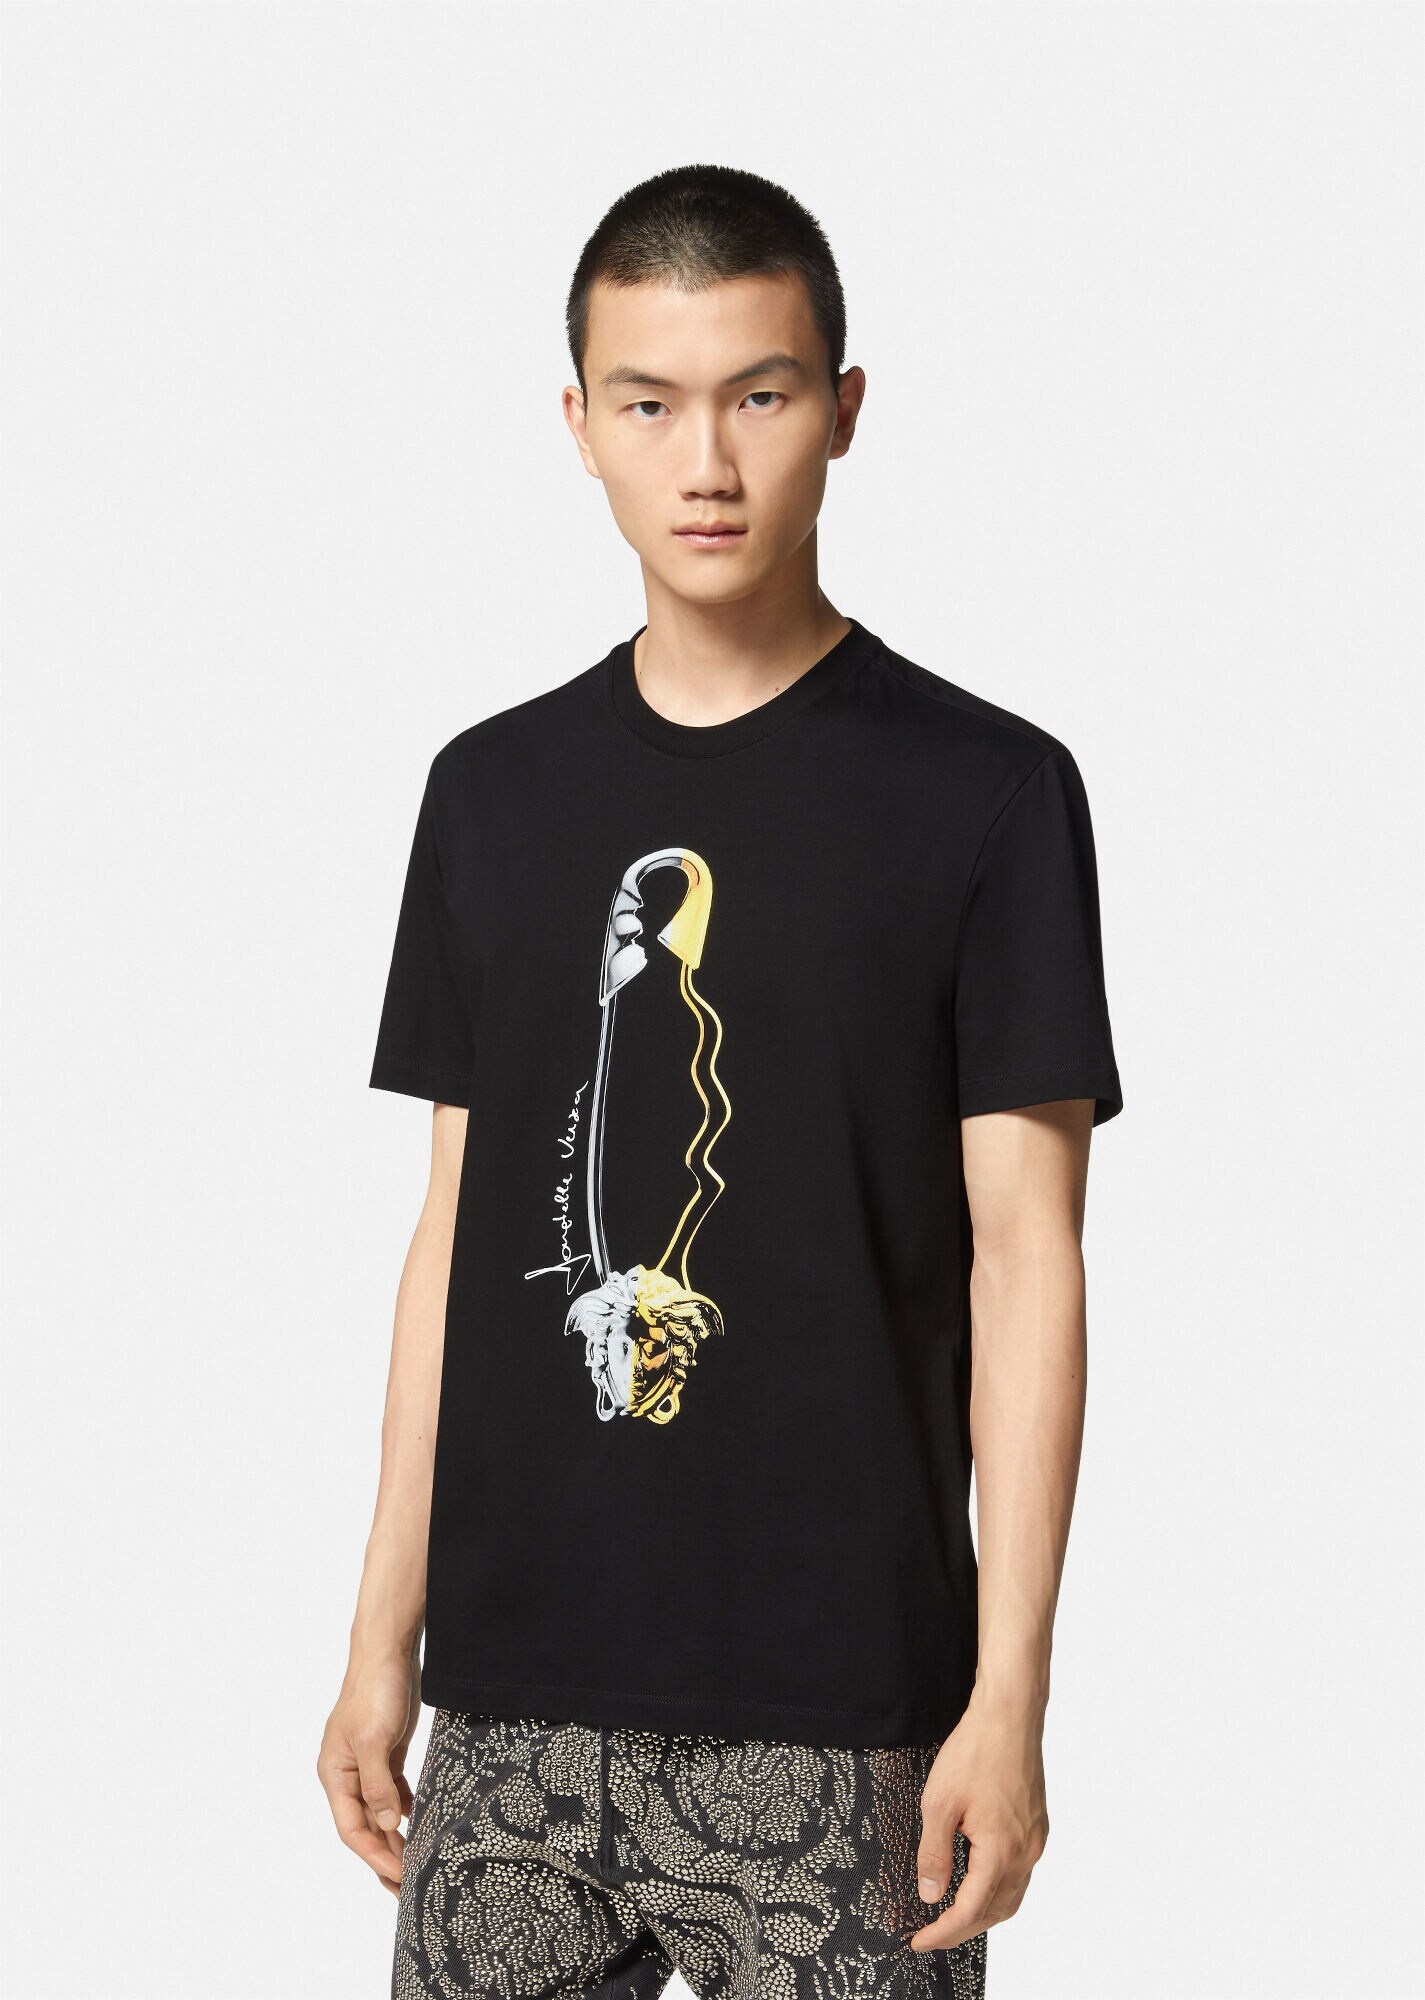 Safety Pin Graphic T-Shirt - 3